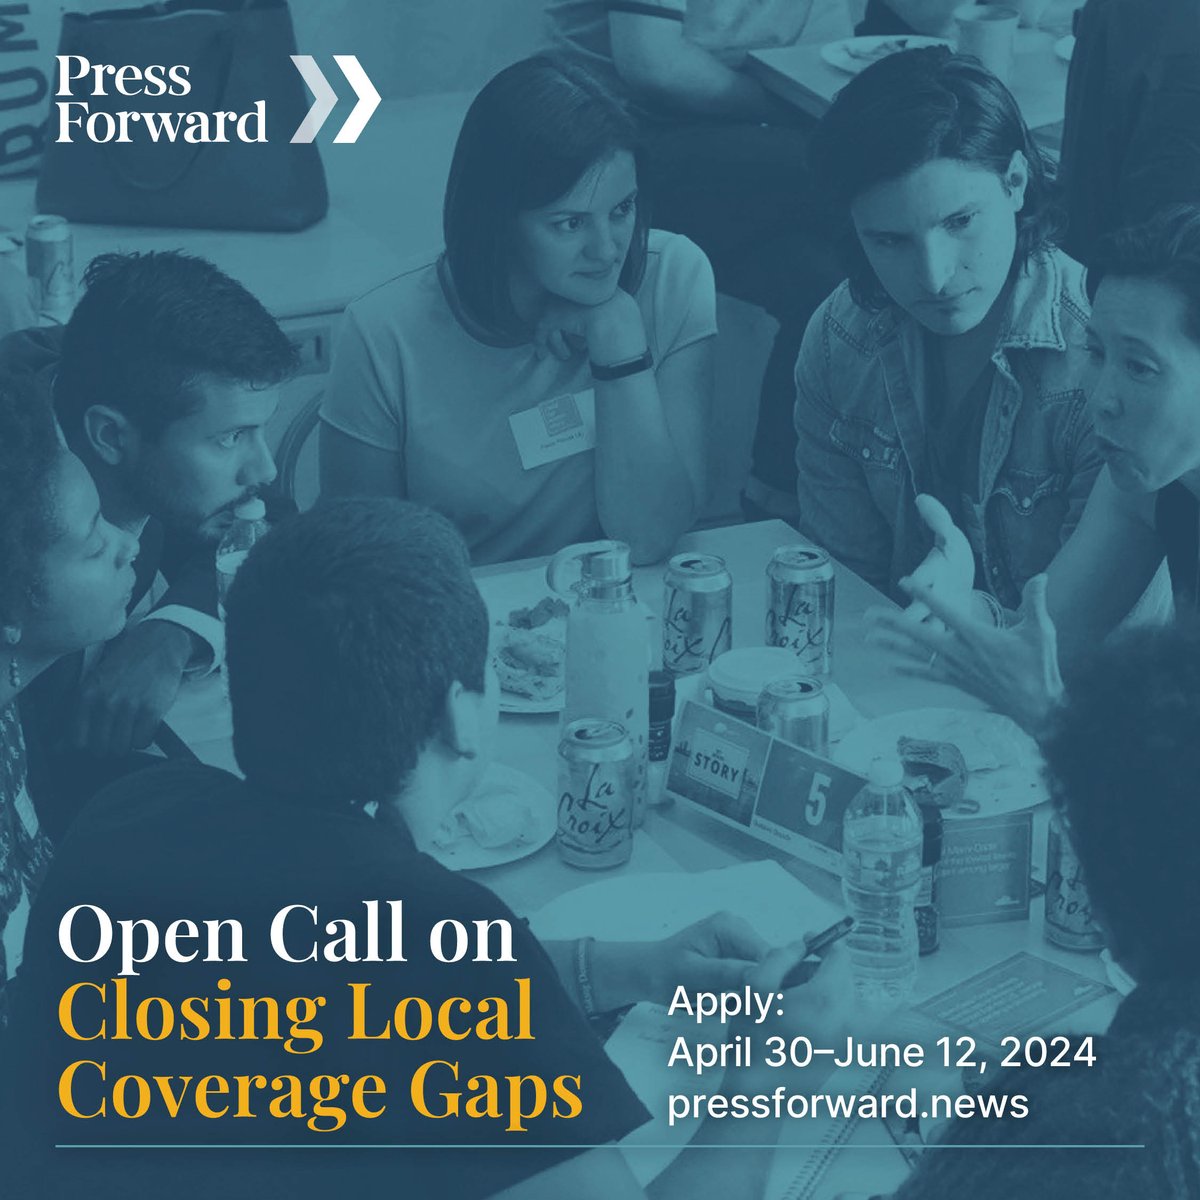 #PressForward is hosting its first funding open call! Guidelines and app go live 4/30. 🔹~$100K in gen op support for 100 newsrooms 🔹For non-profit and for-profit news outlets with budgets up to $1M 🔹Grant writing help and info sessions provided More: bit.ly/3UuIGpv